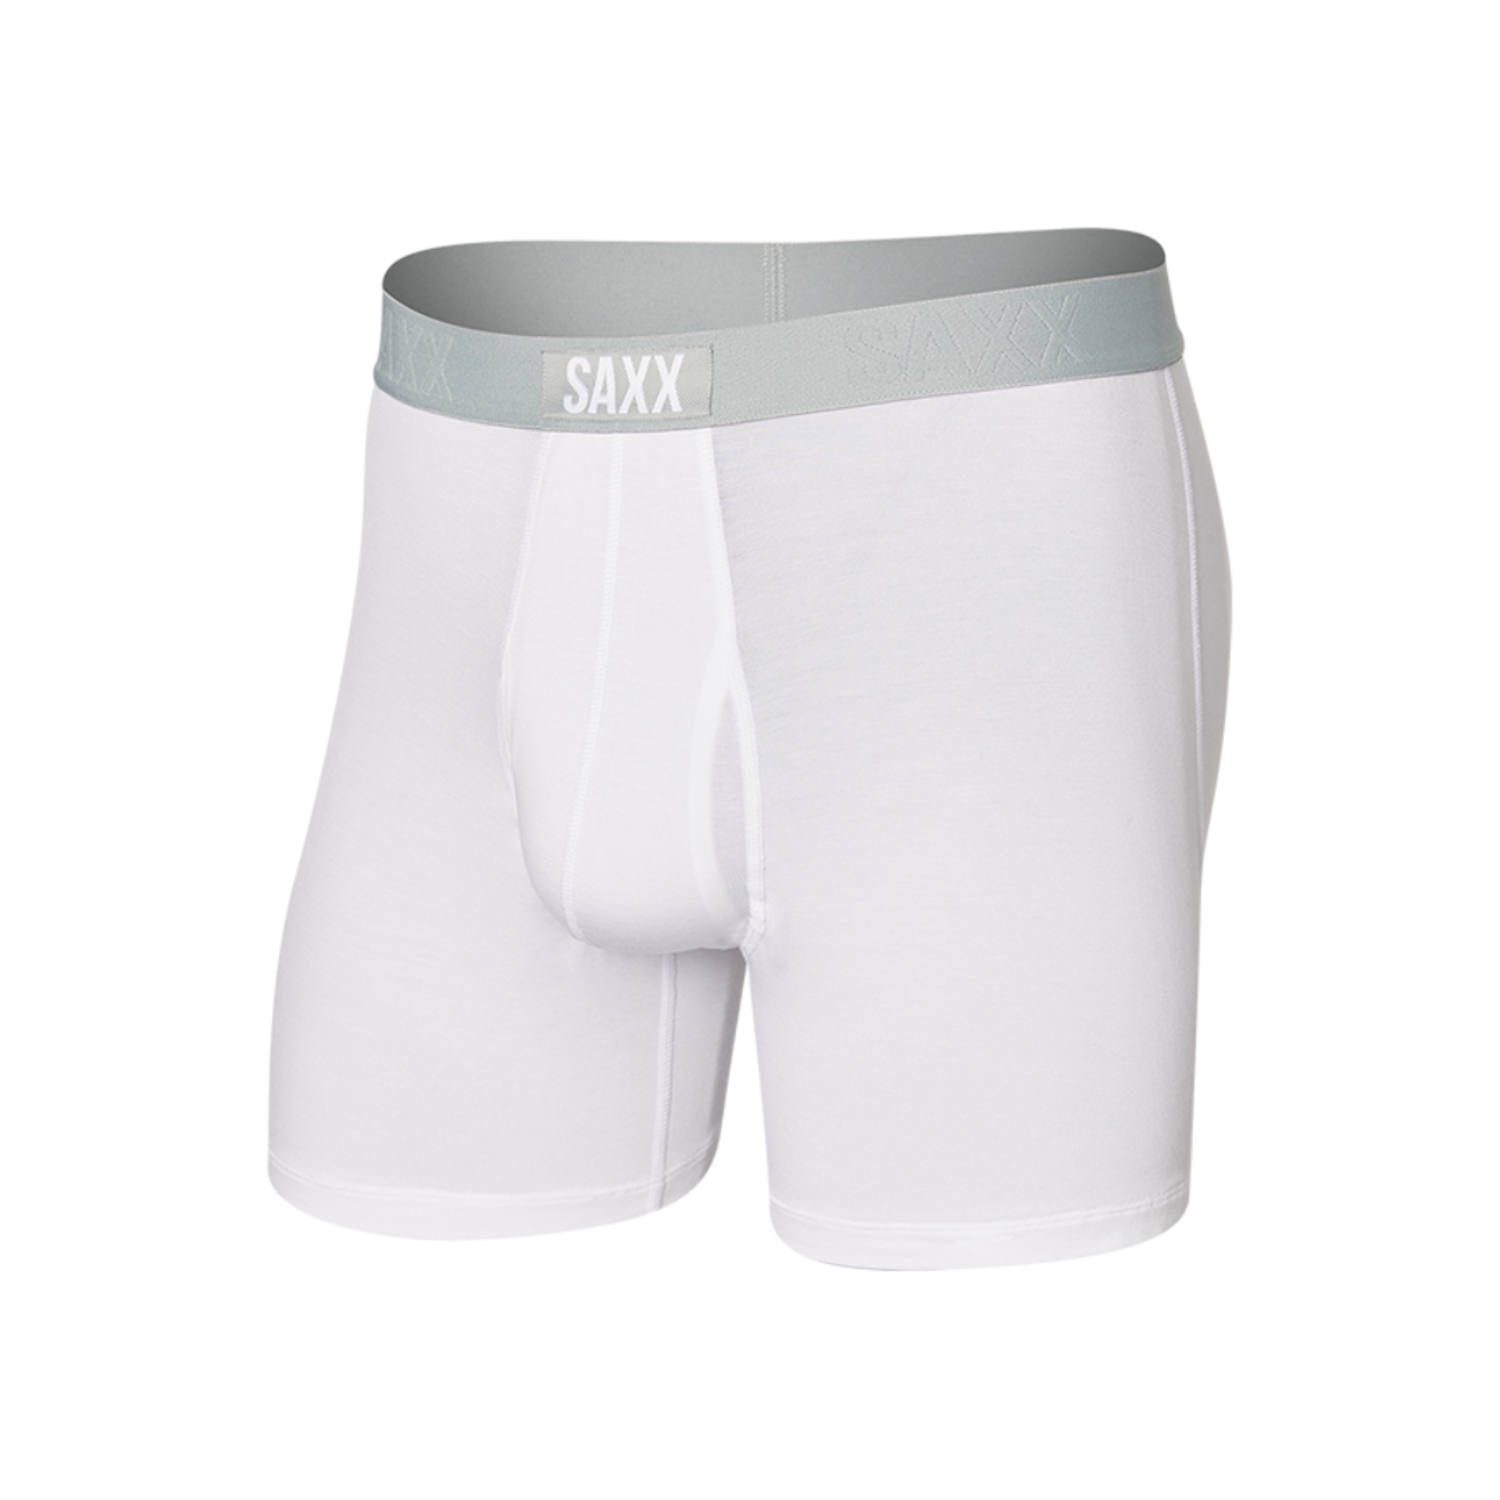 Ultra Boxer Brief White (WHI) SXBB30F - Lace & Day